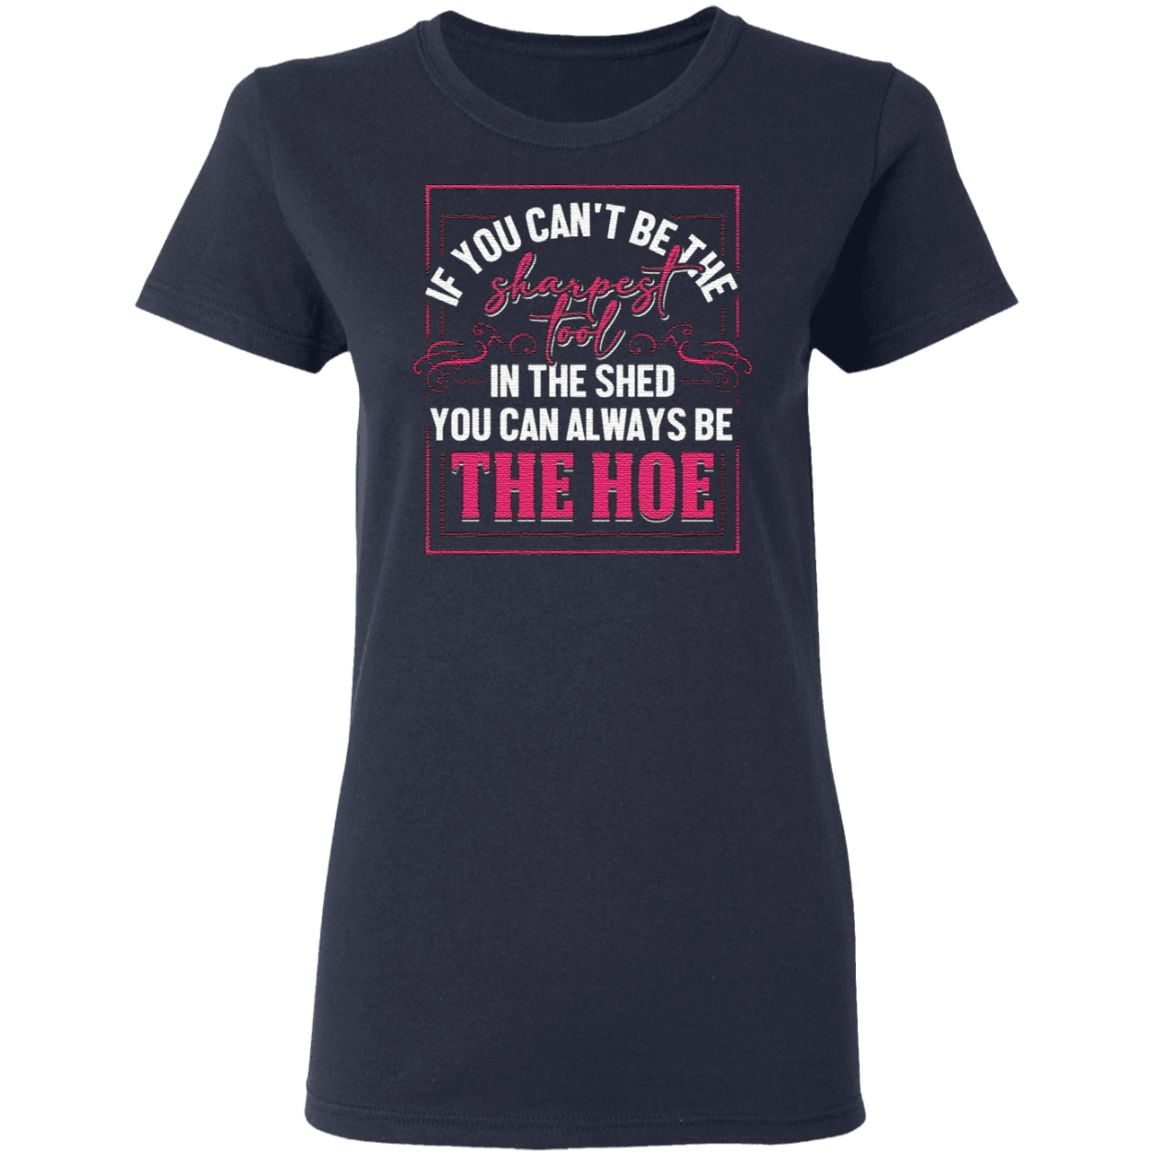 If You Can’t Be The Sharpest Tool In The Shed You Can Always Be The Hoe T-Shirt